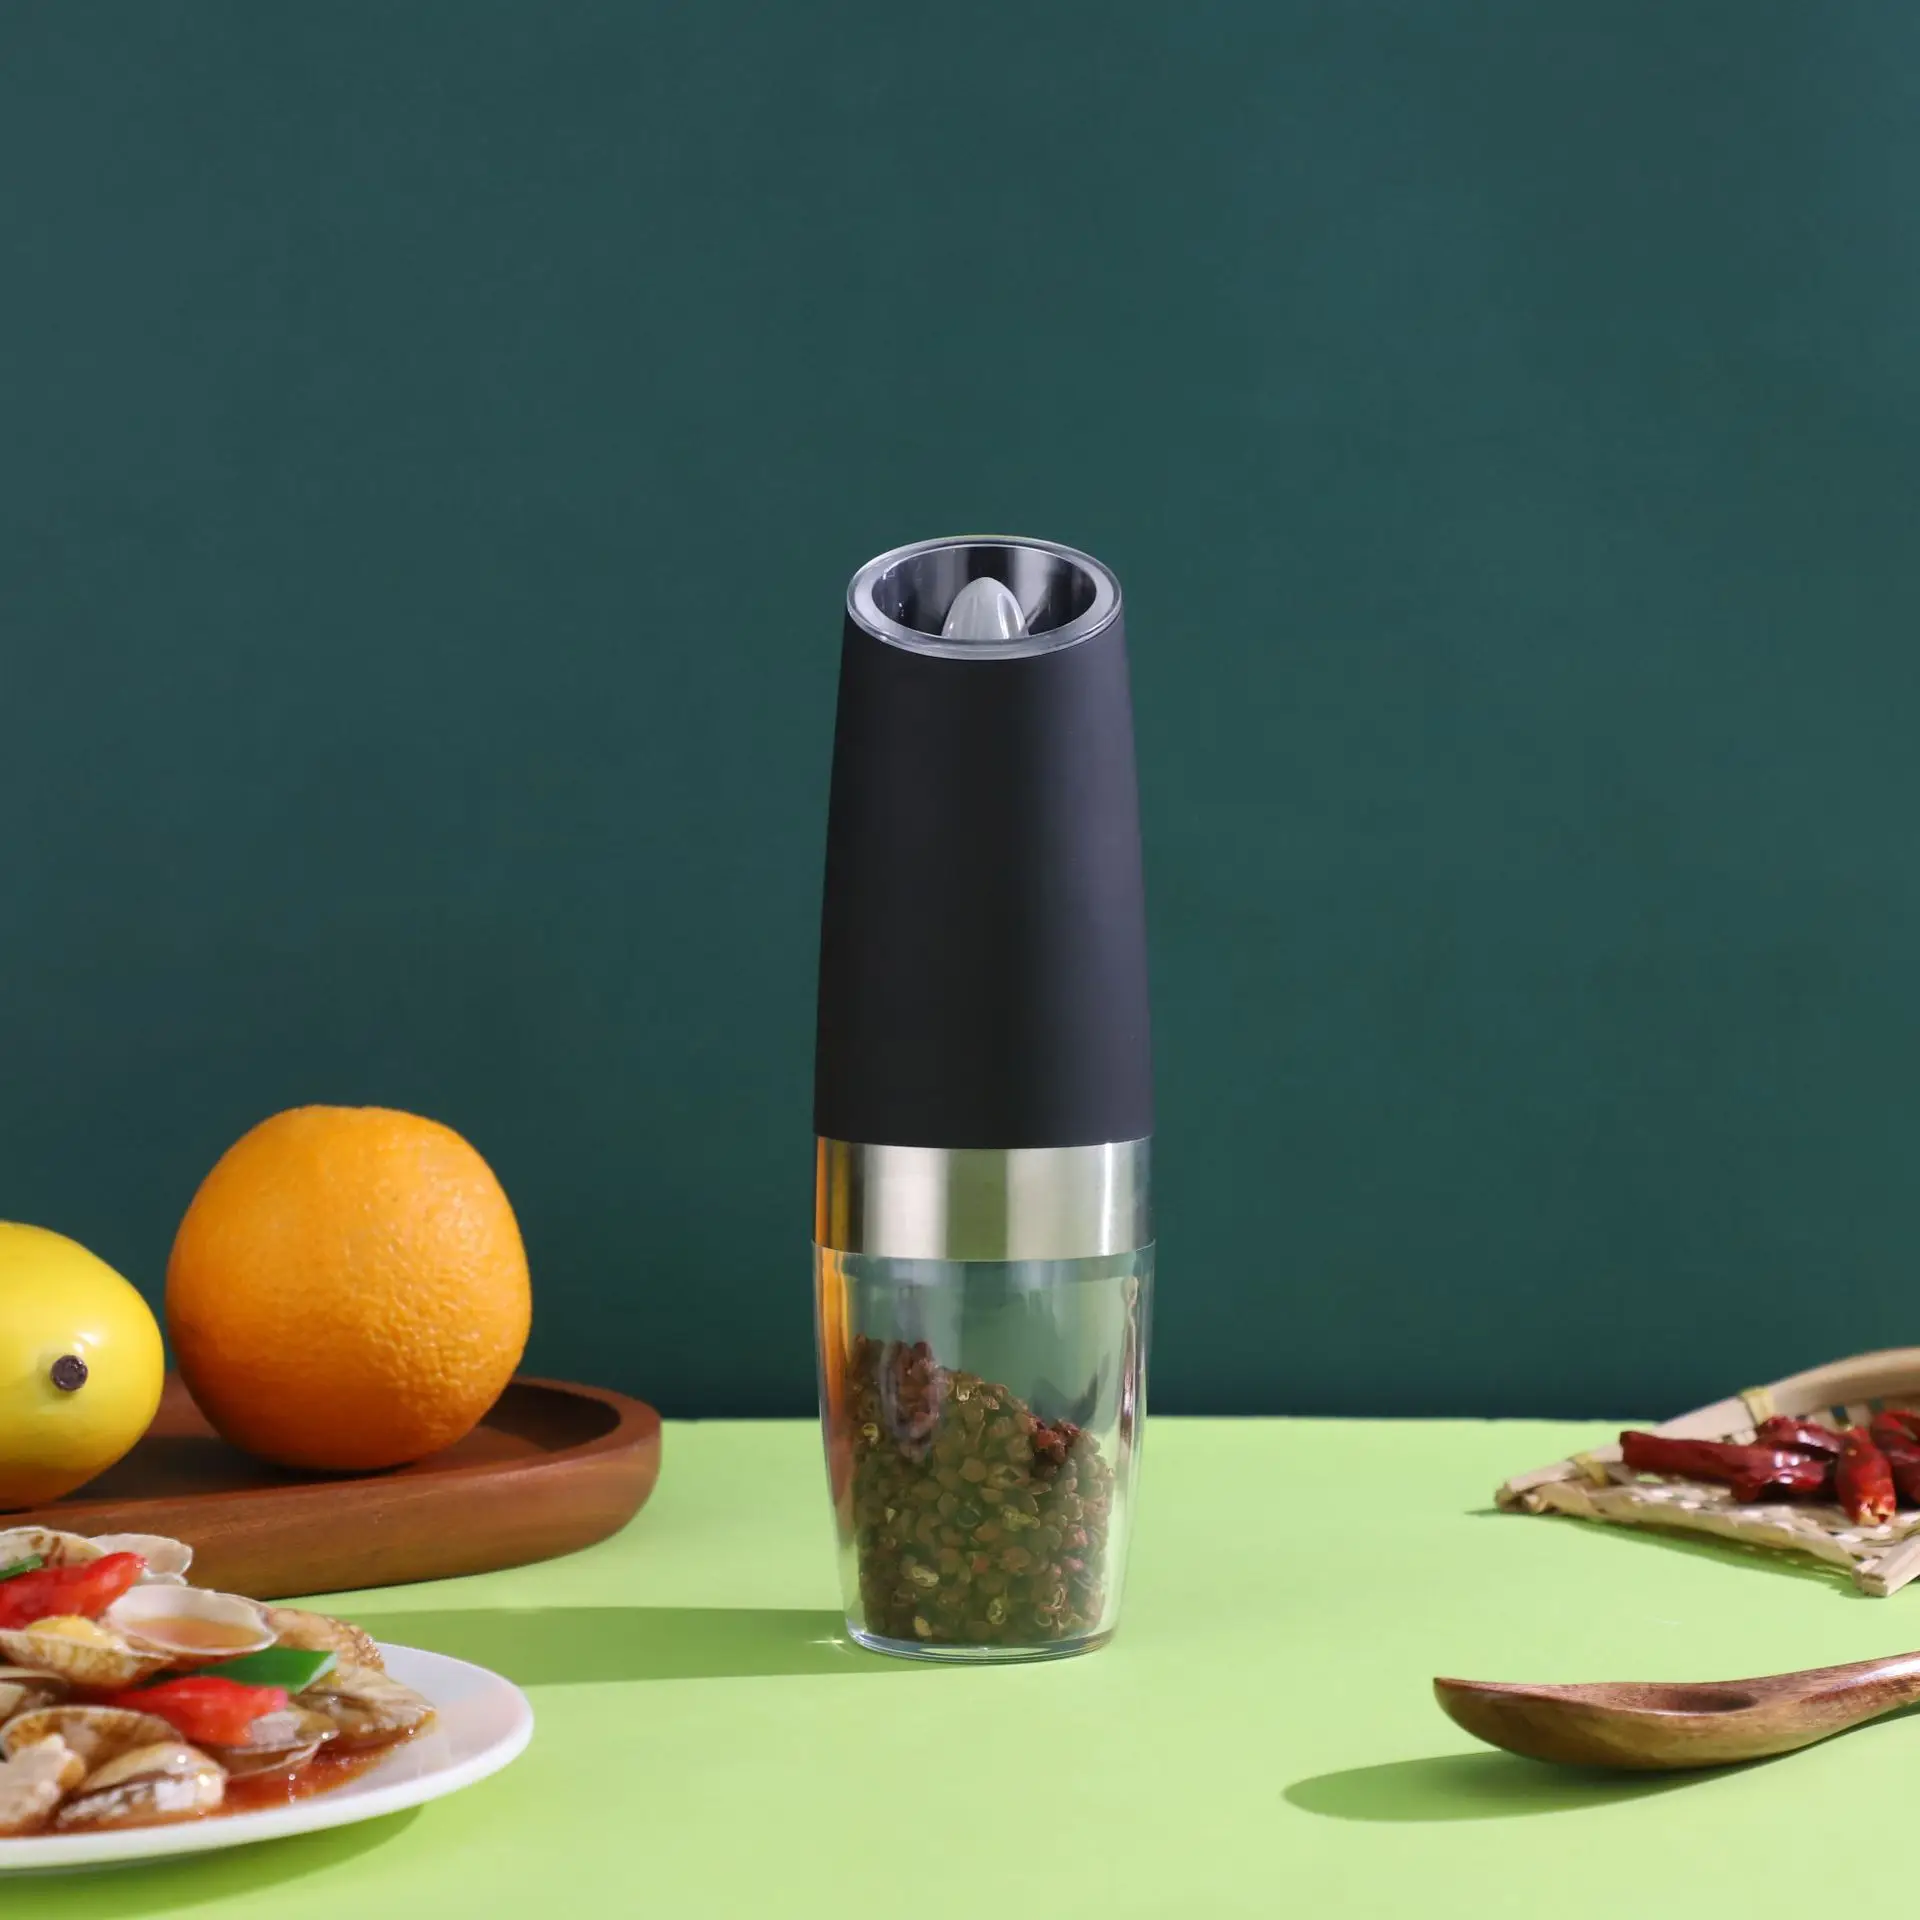 DTK Electric Gravity Salt And Pepper Grinder Automatic Operated